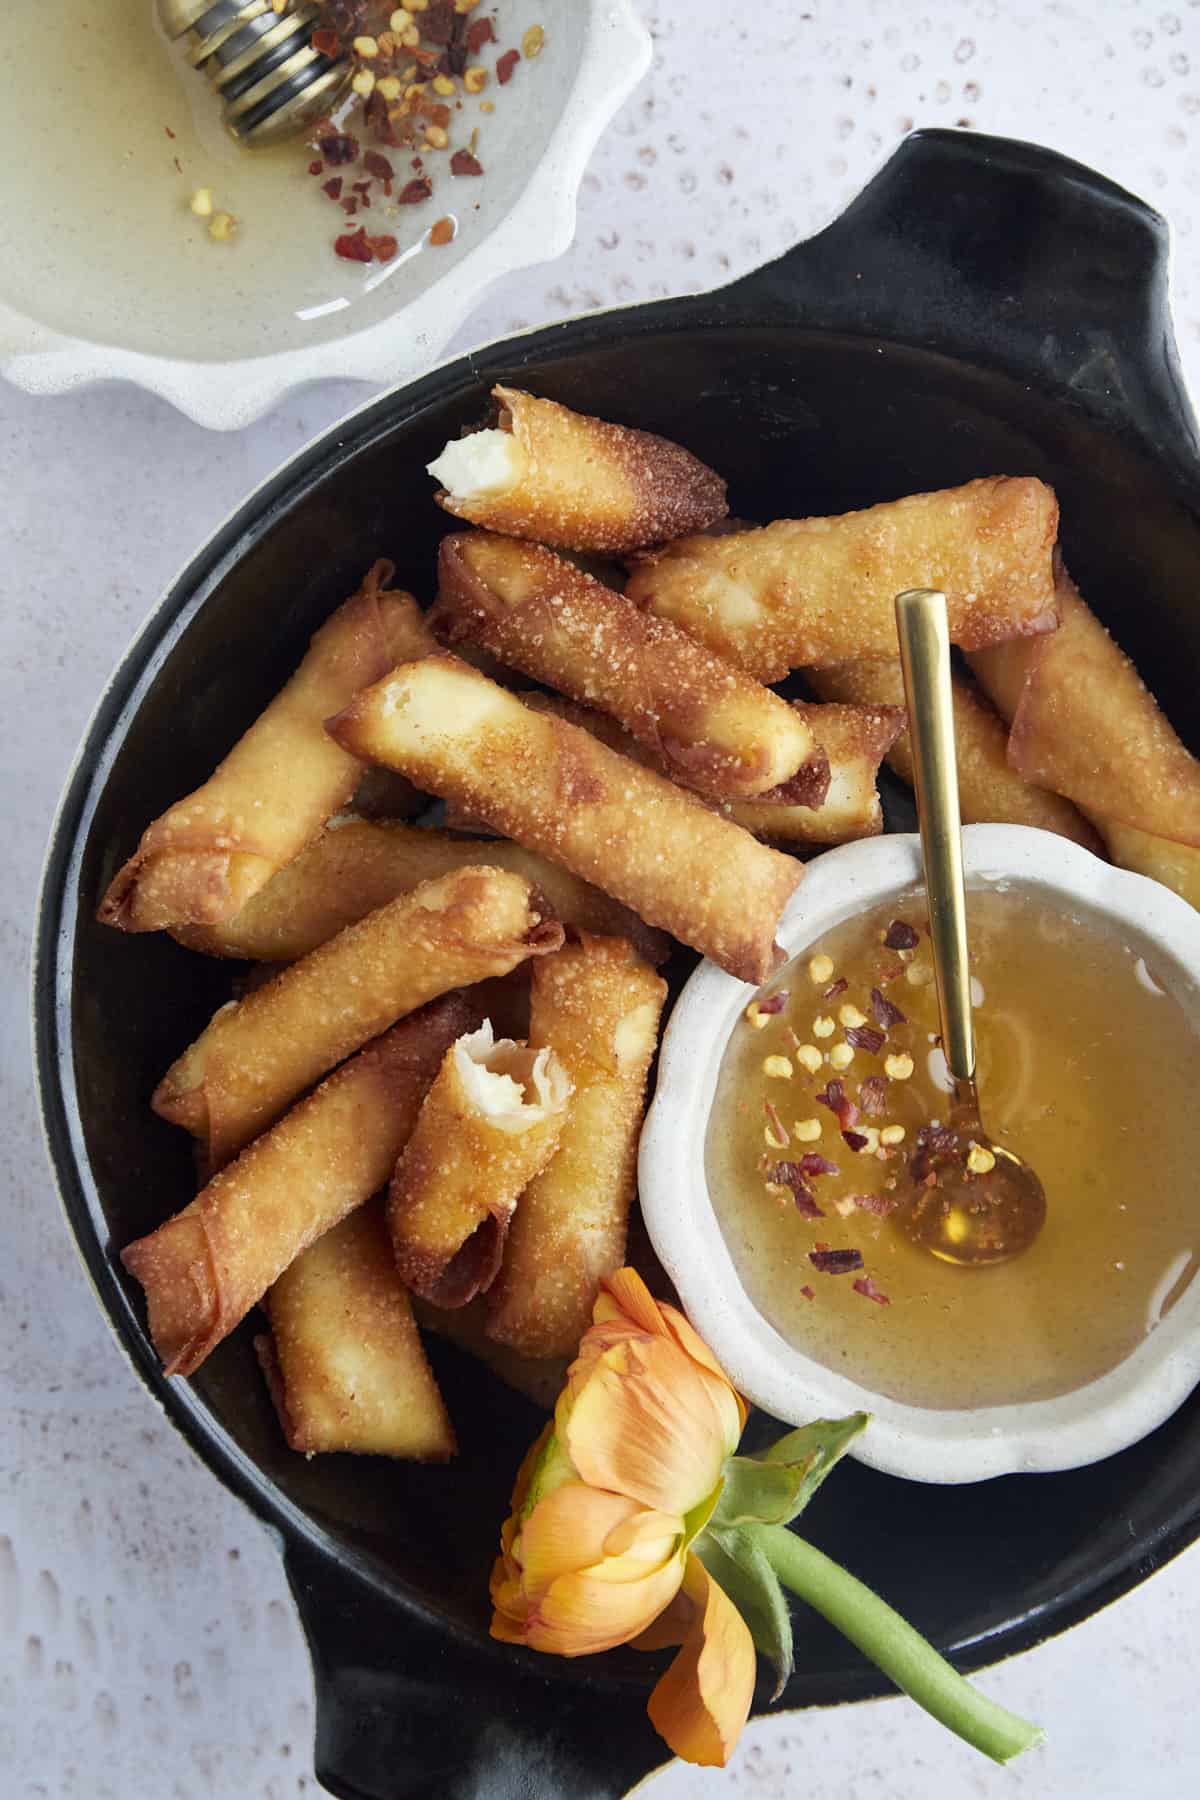 a basket of fried feta rolls with hot honey on the side